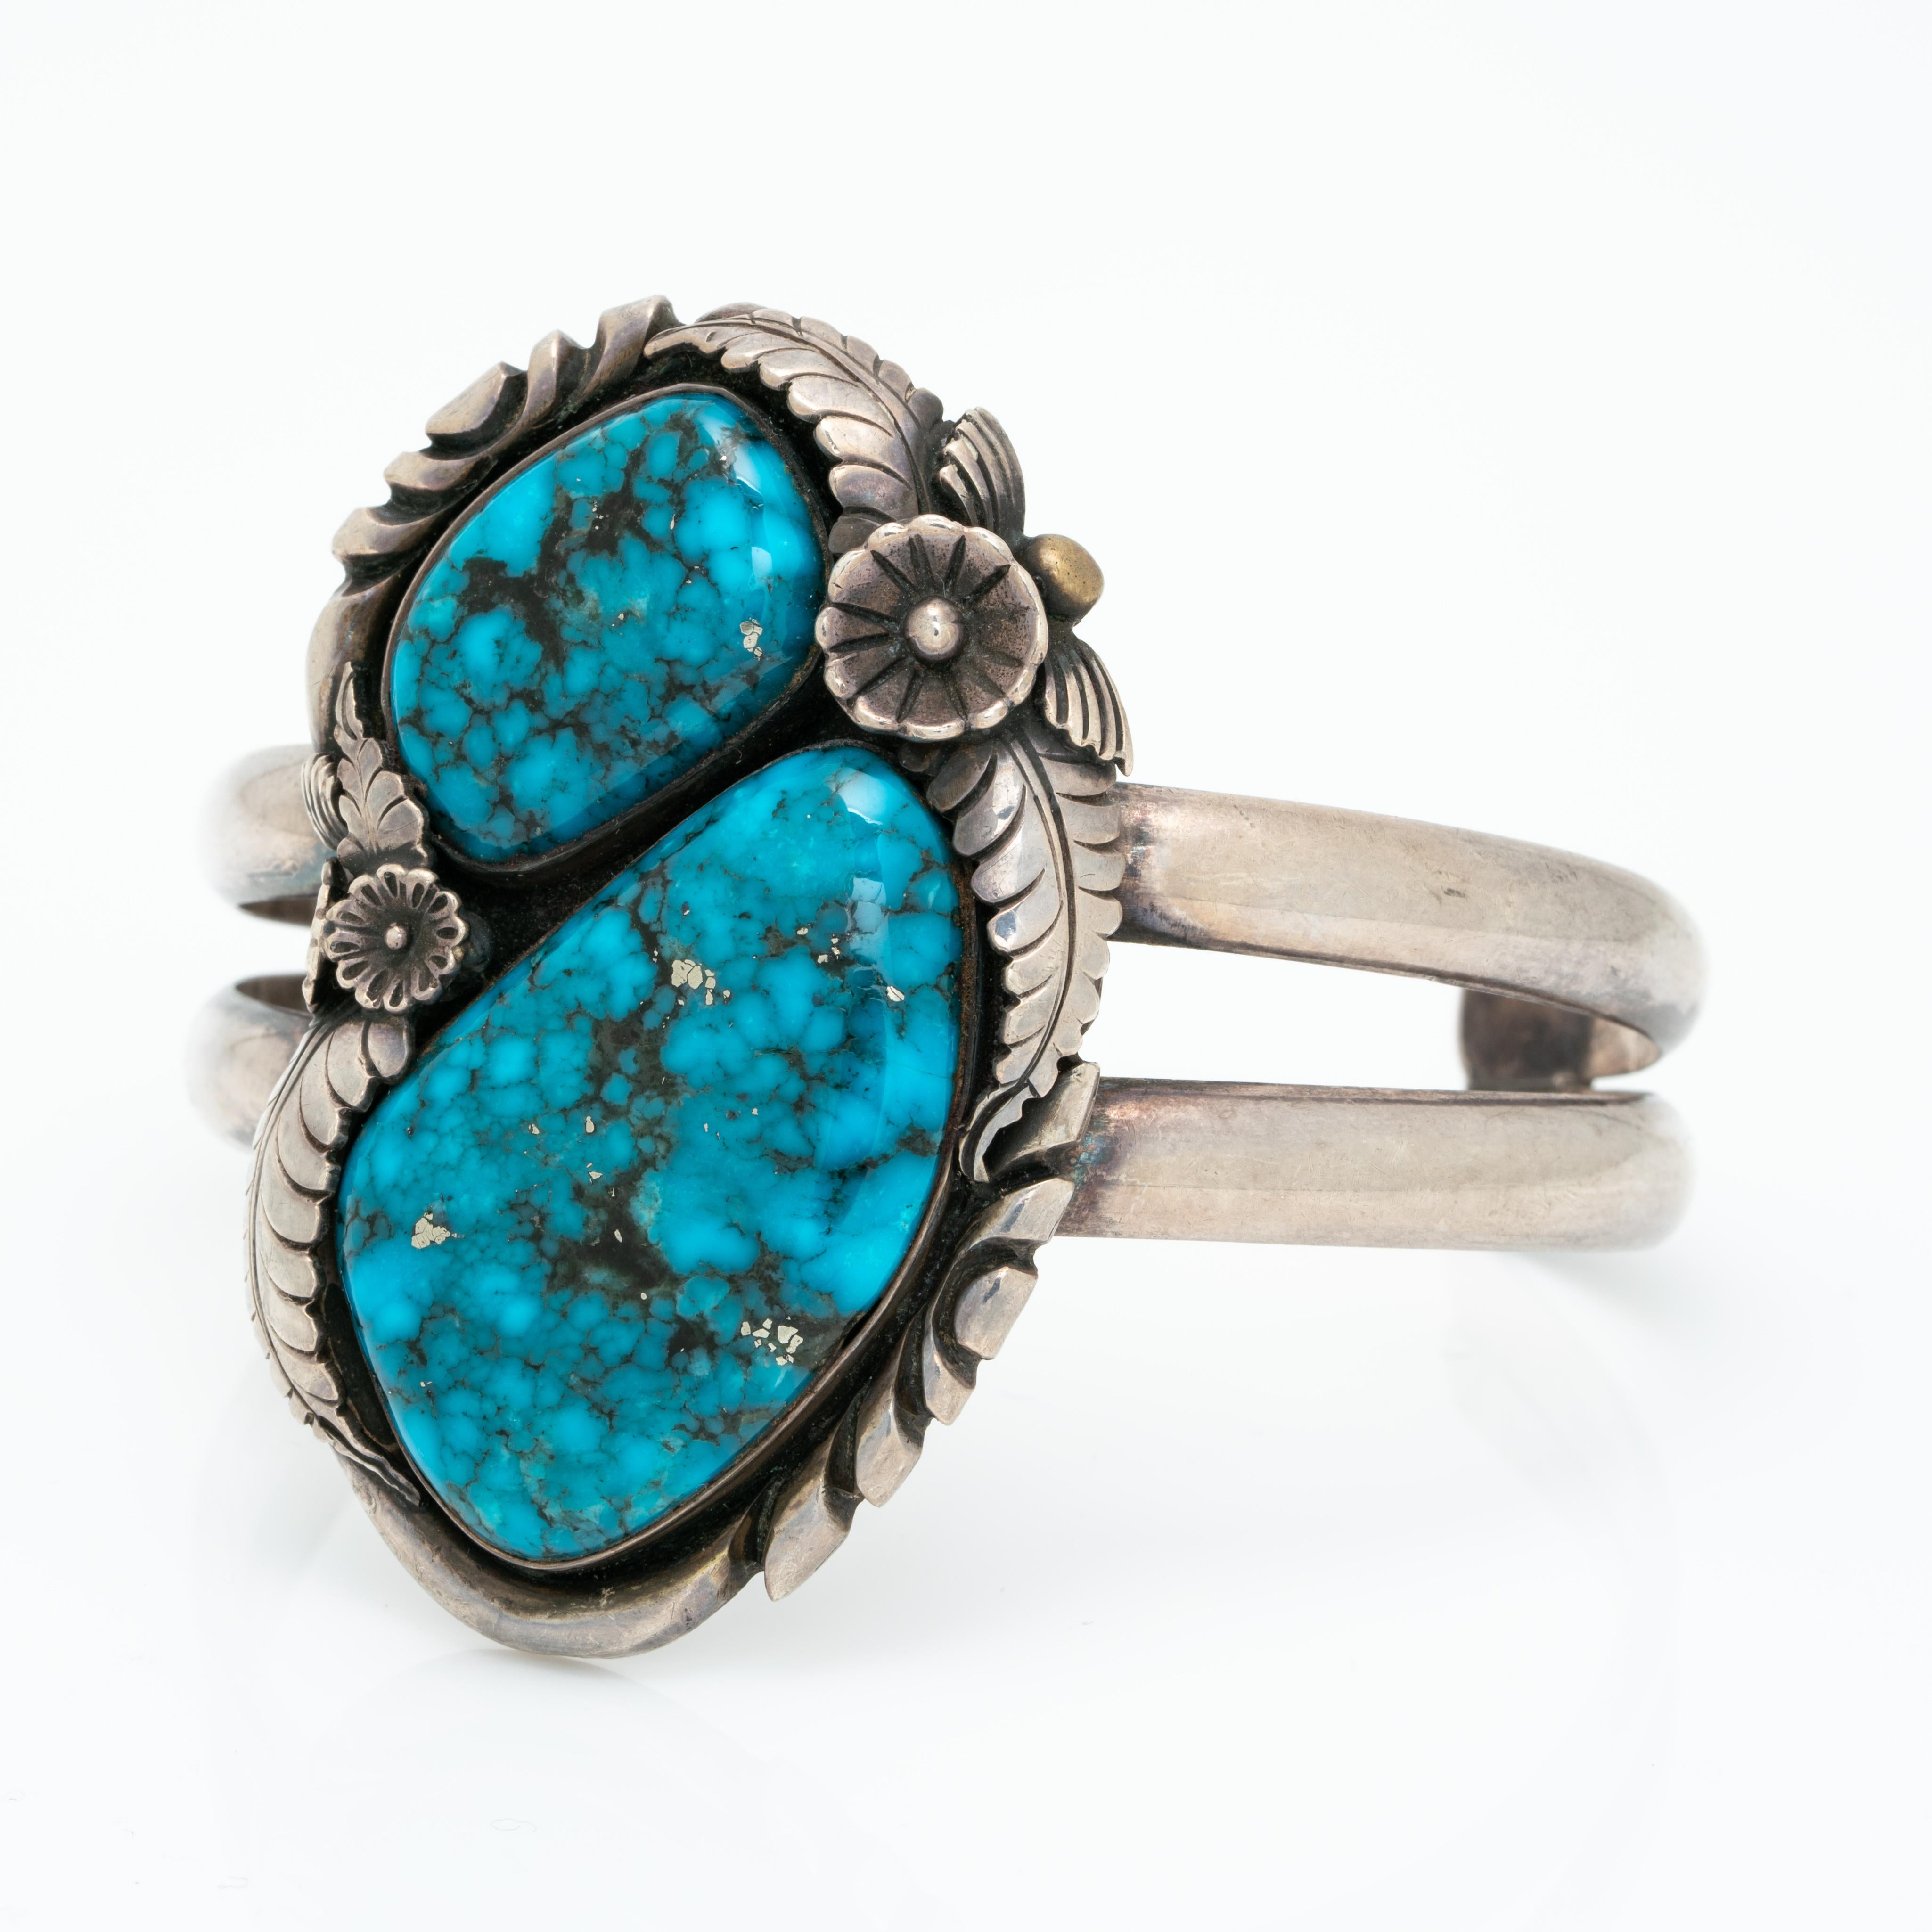 Vintage Native American Navajo Large Morenci Turquoise And Silver Cuff c. 1960s

Hand forged. A wonderful signed vintage Navajo cuff!

The patina of the silver is oxidized, we do not clean vintage and antique silver pieces as some clients prefer